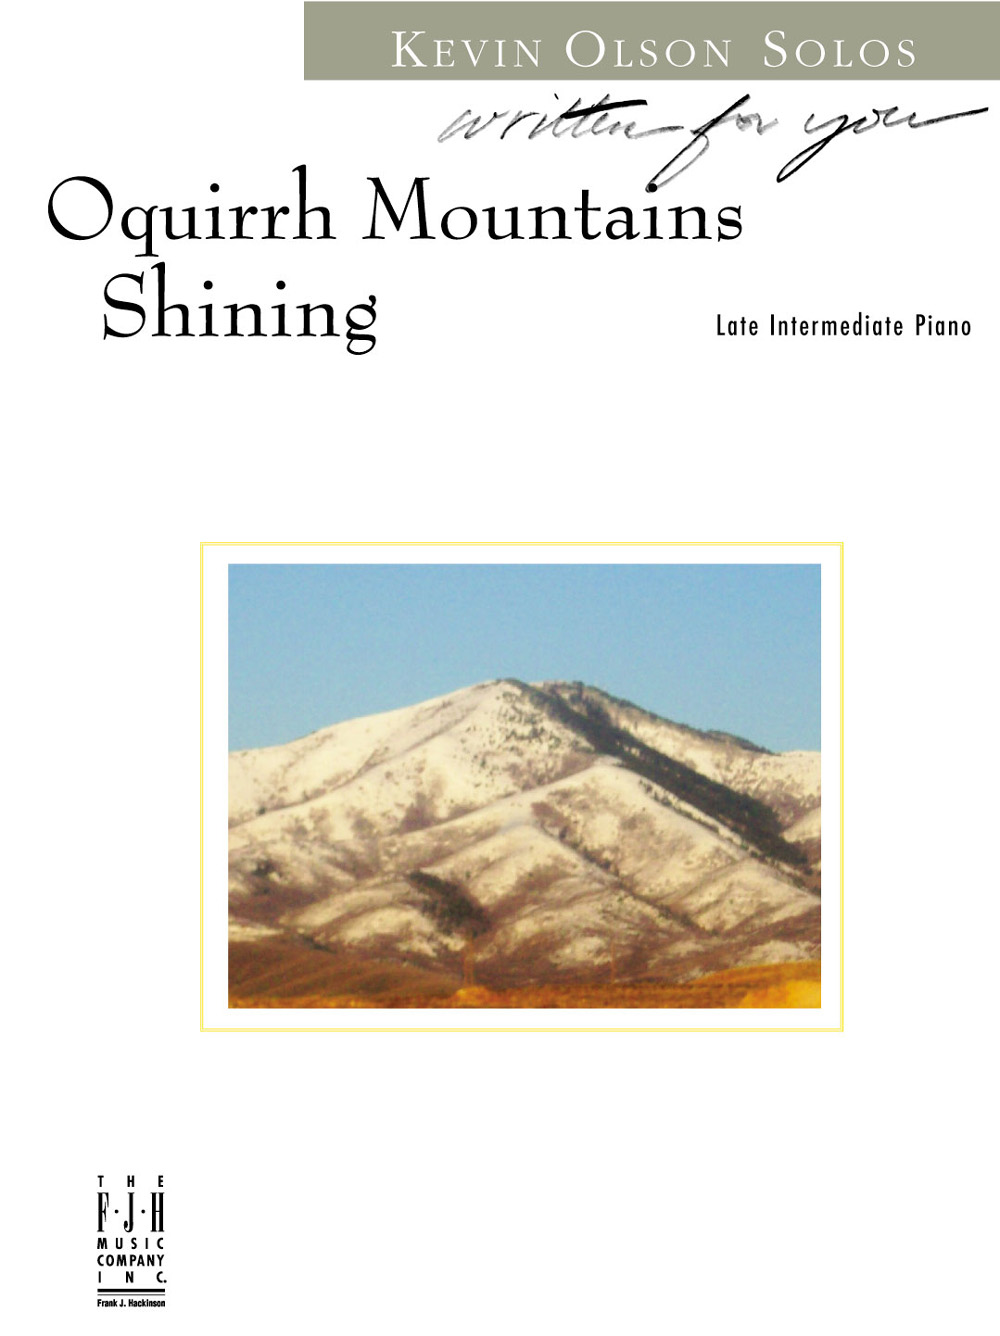 Oquirrh Mountains Shining FED-MD2 [piano]